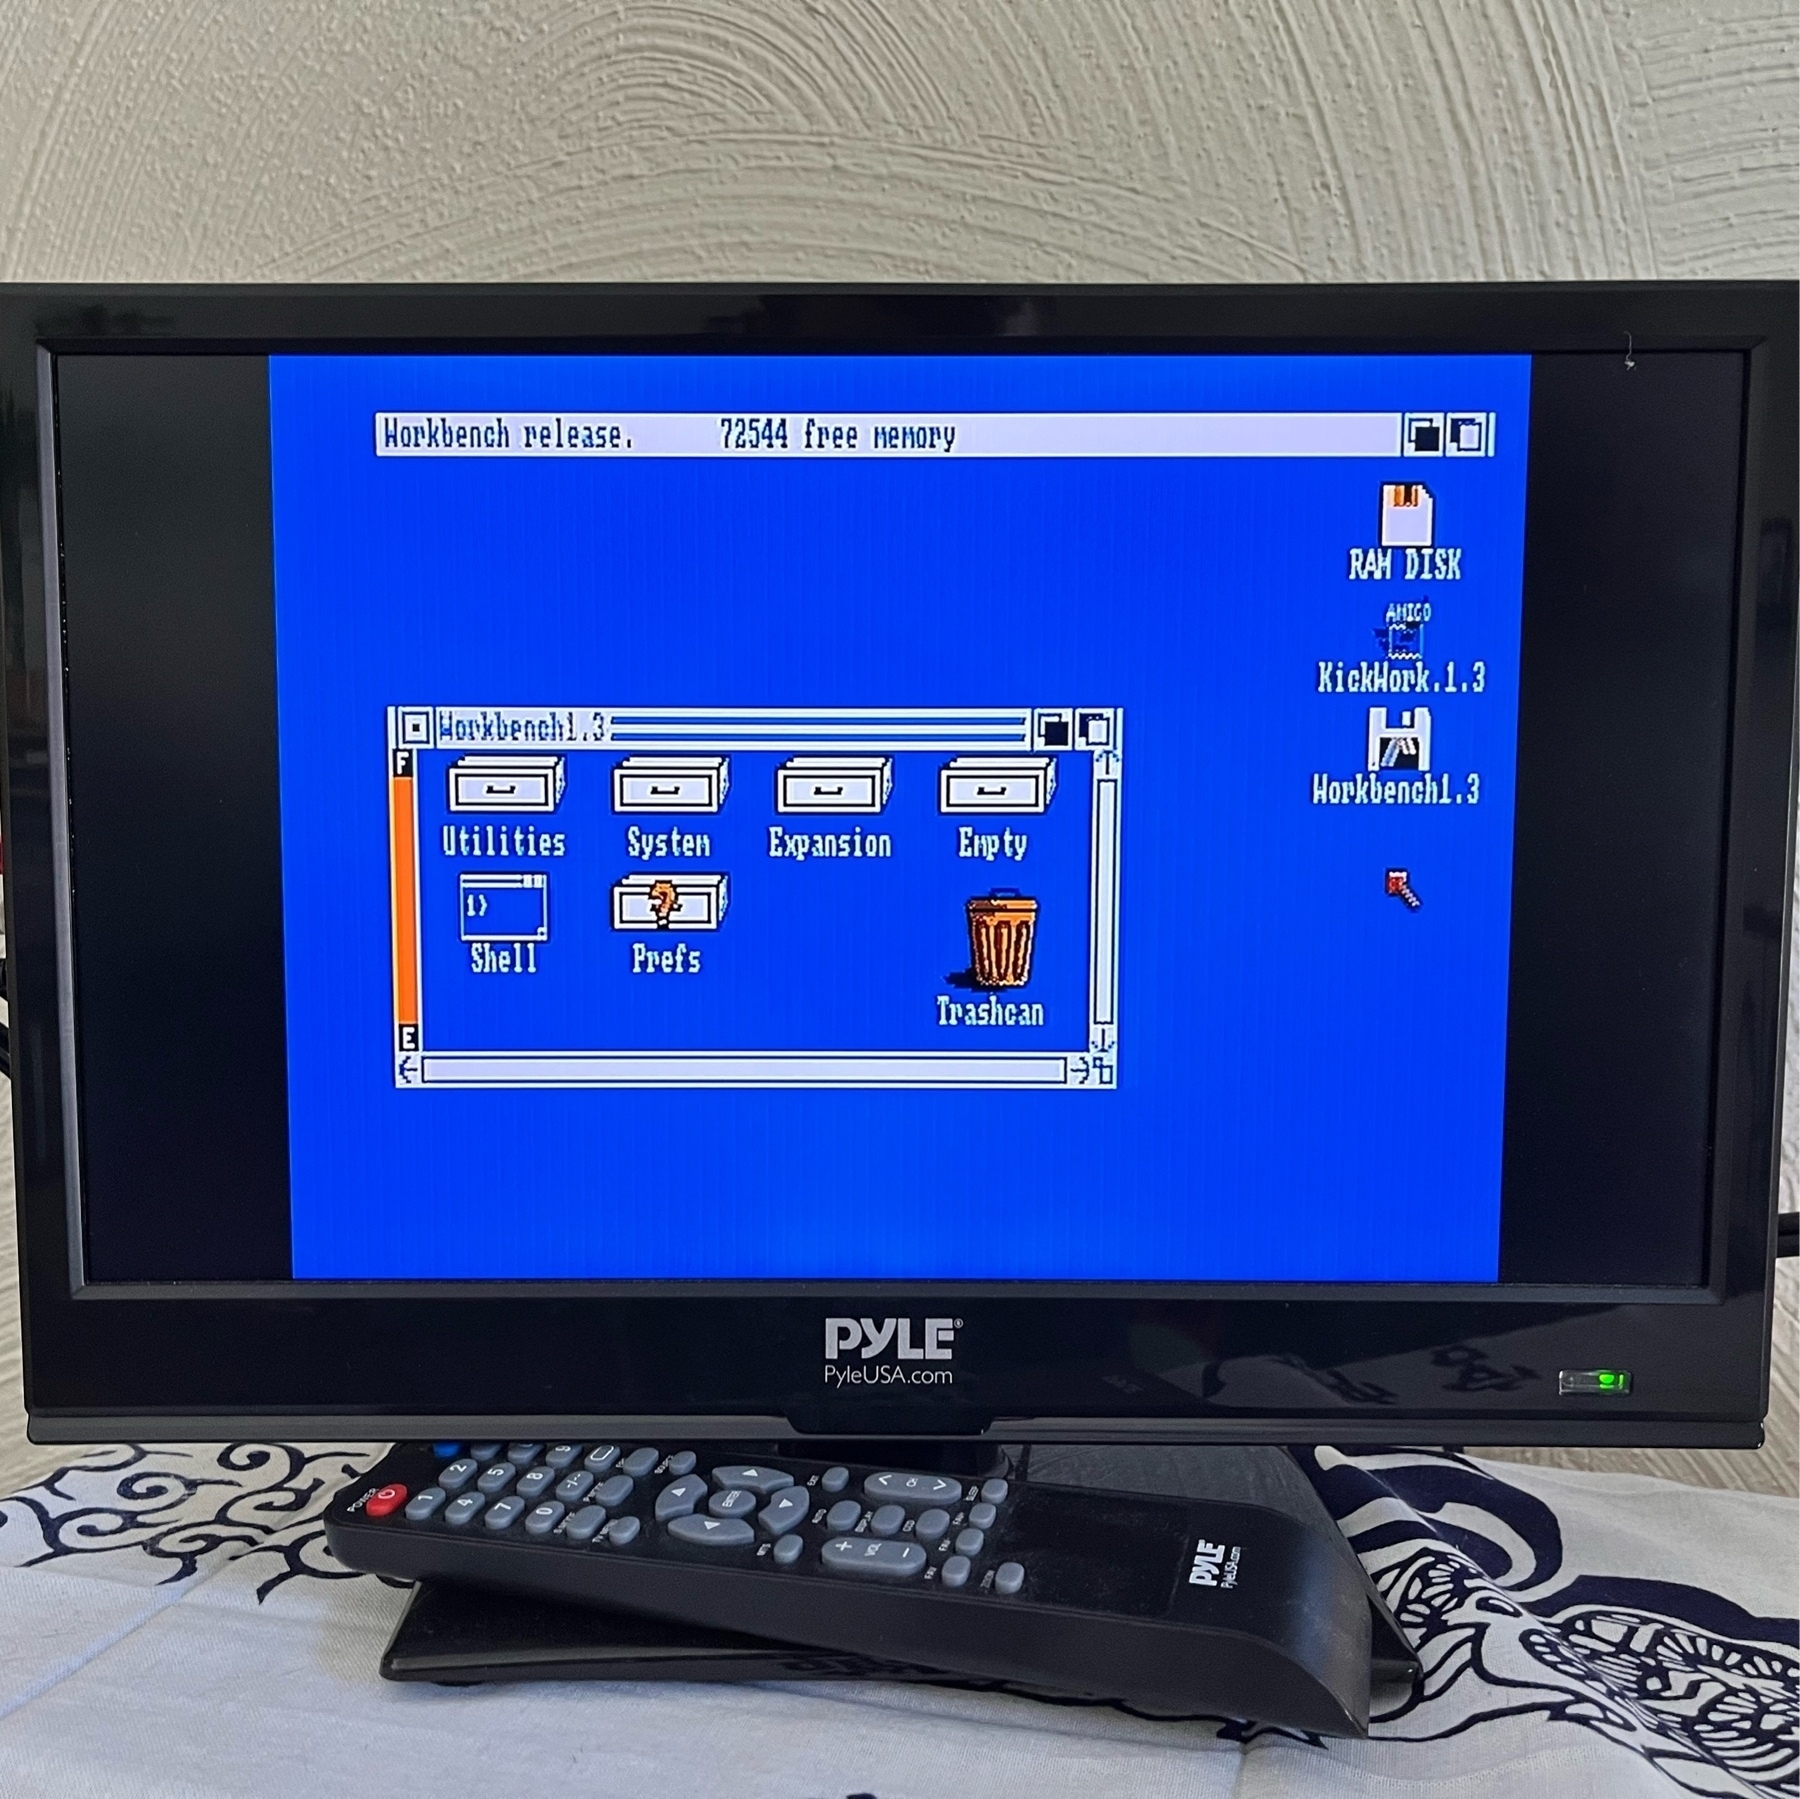 amiga 1000 booted to workbench 1.3